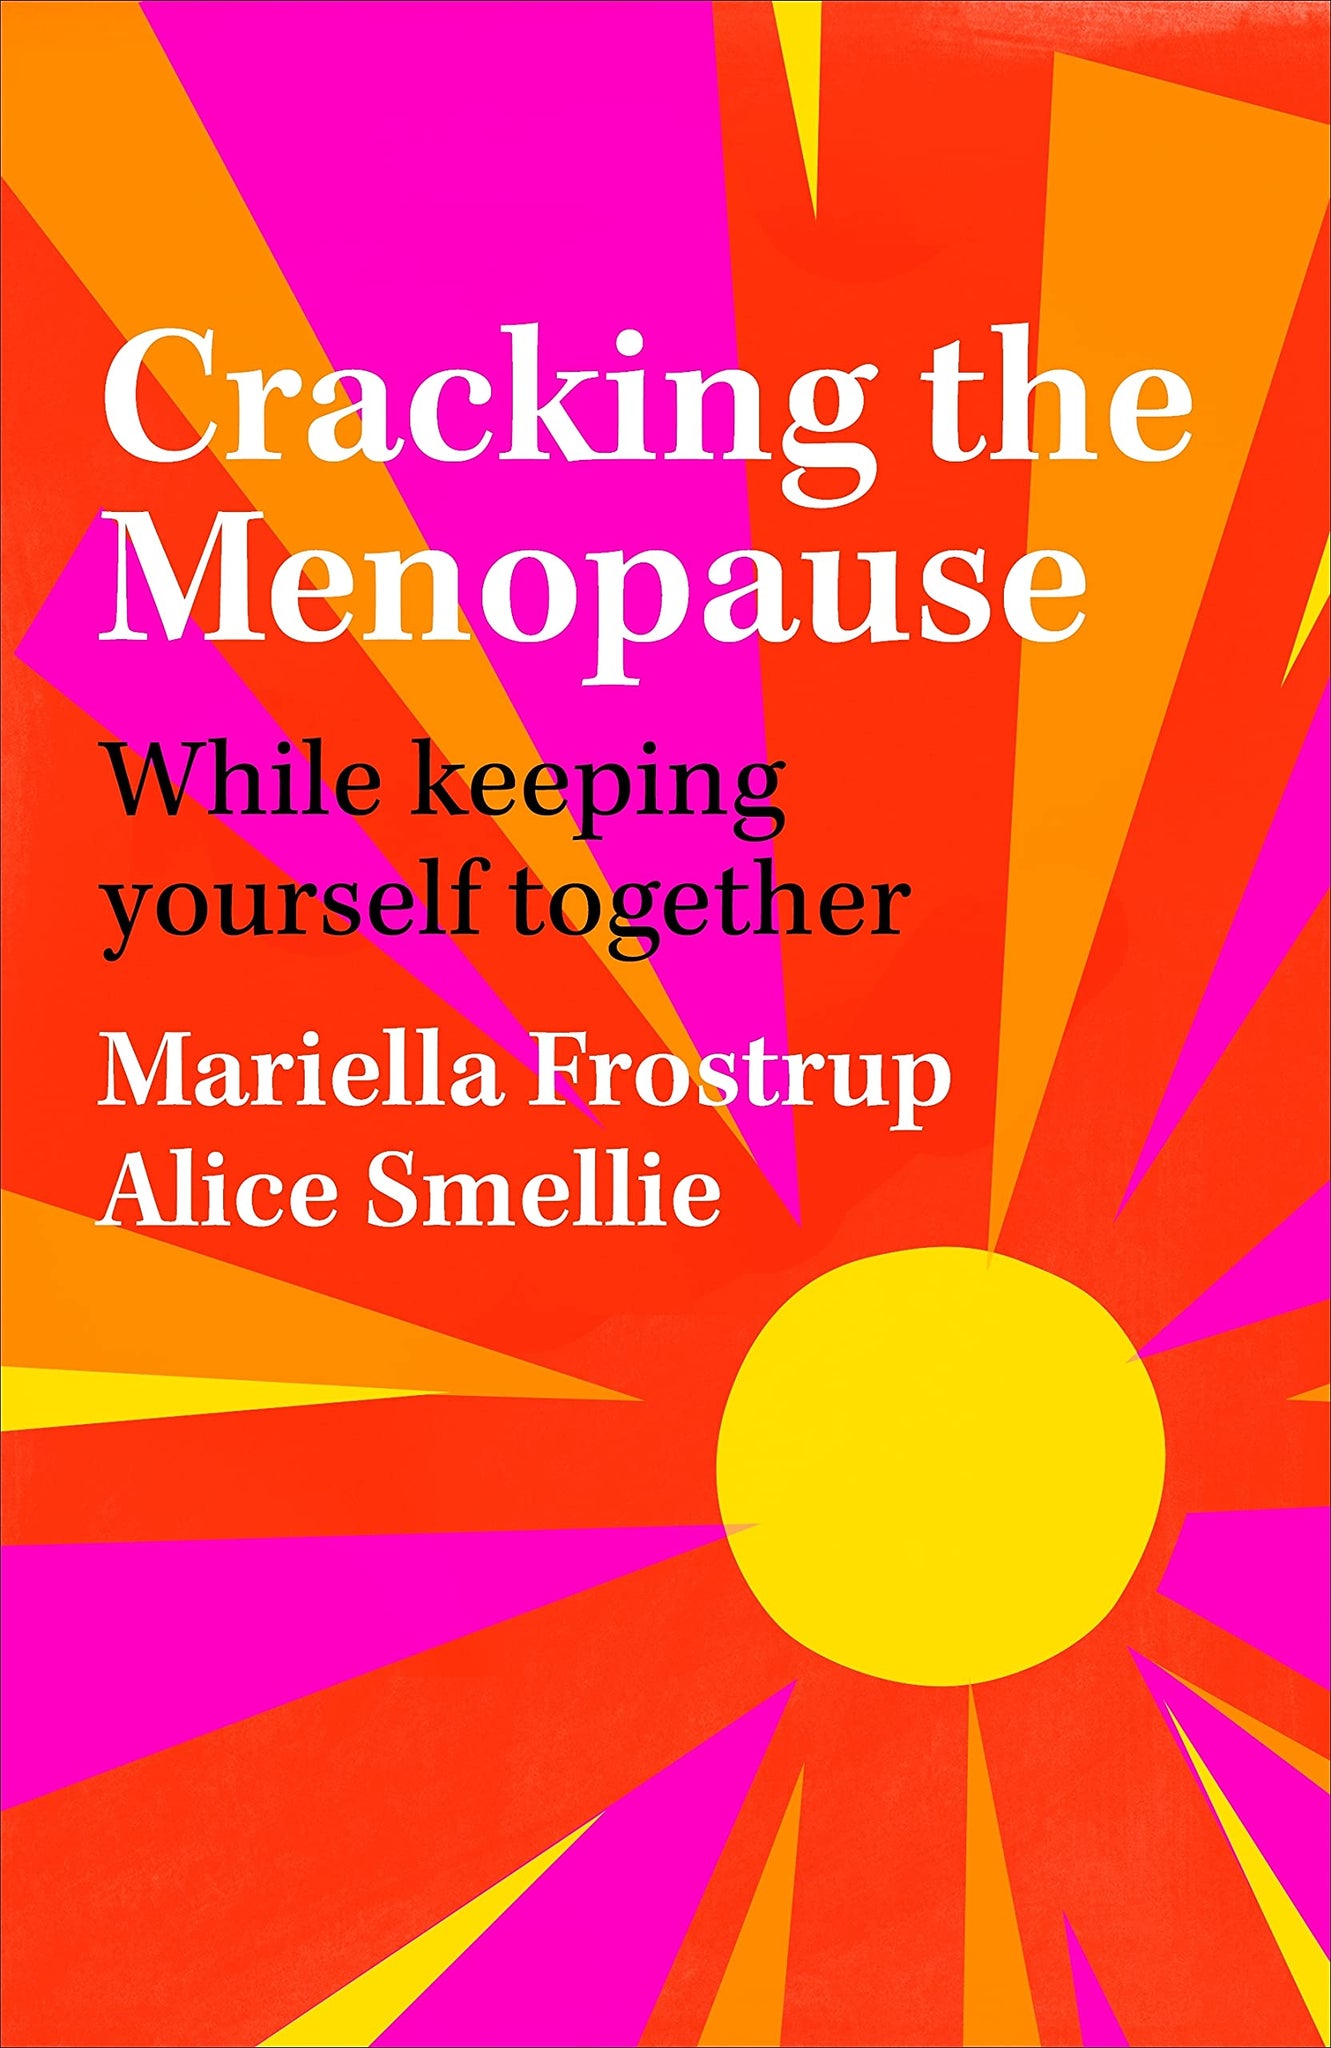 Cracking the Menopause: While Keeping Yourself Together by Mariella Frostrup,  Alice Smellie (Primary Contributor)